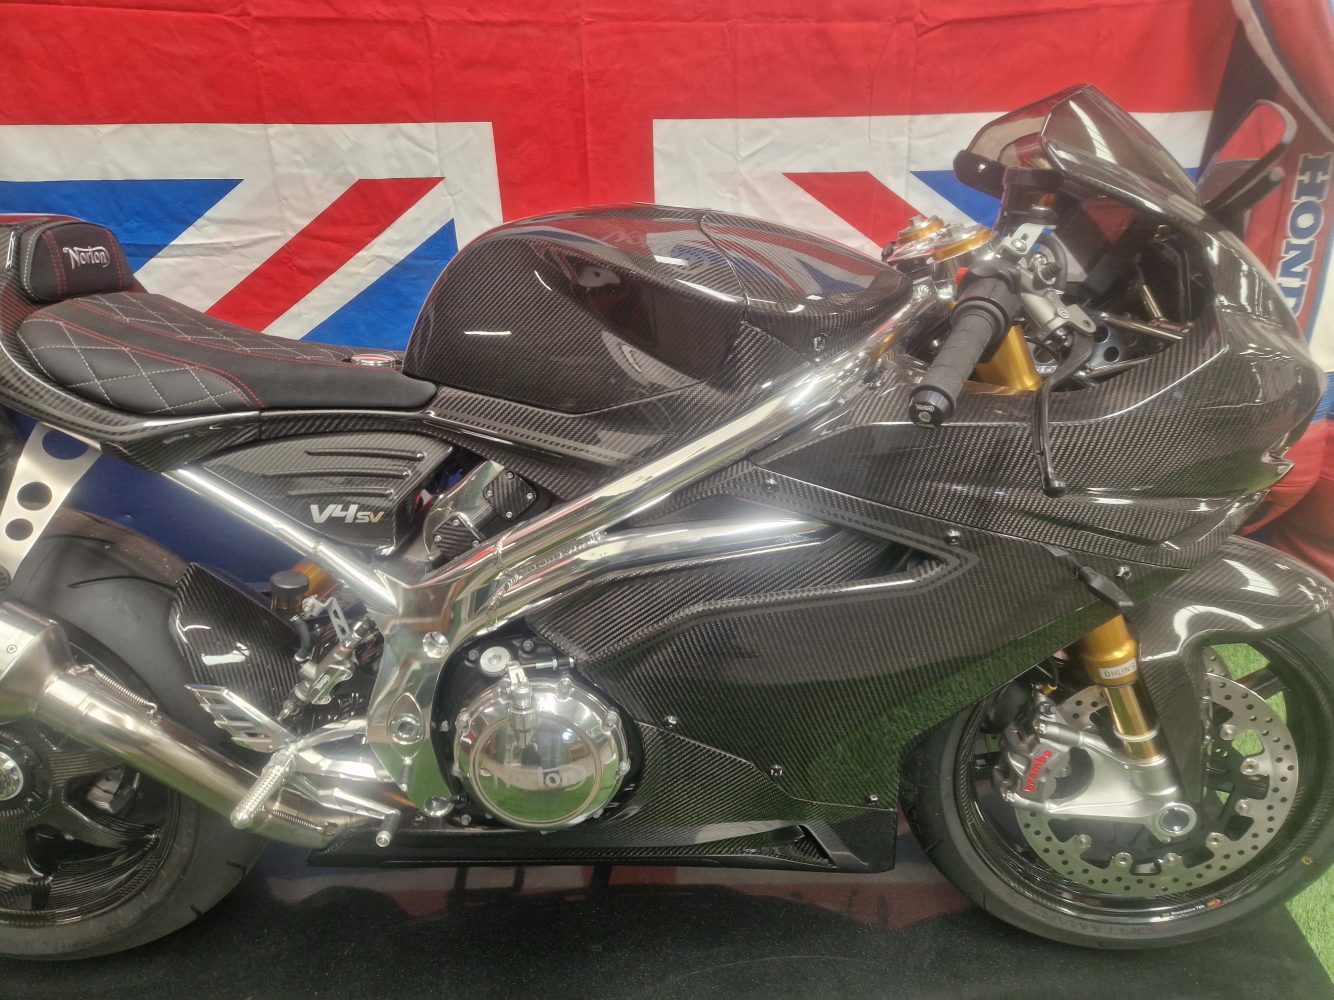 NORTON V4 SV.. NEW AND UN-RIDDEN, ORDERED IN 2017 DELIVERED 2024. A STUNNING UNUSED EXAMPLE OF - Image 6 of 9